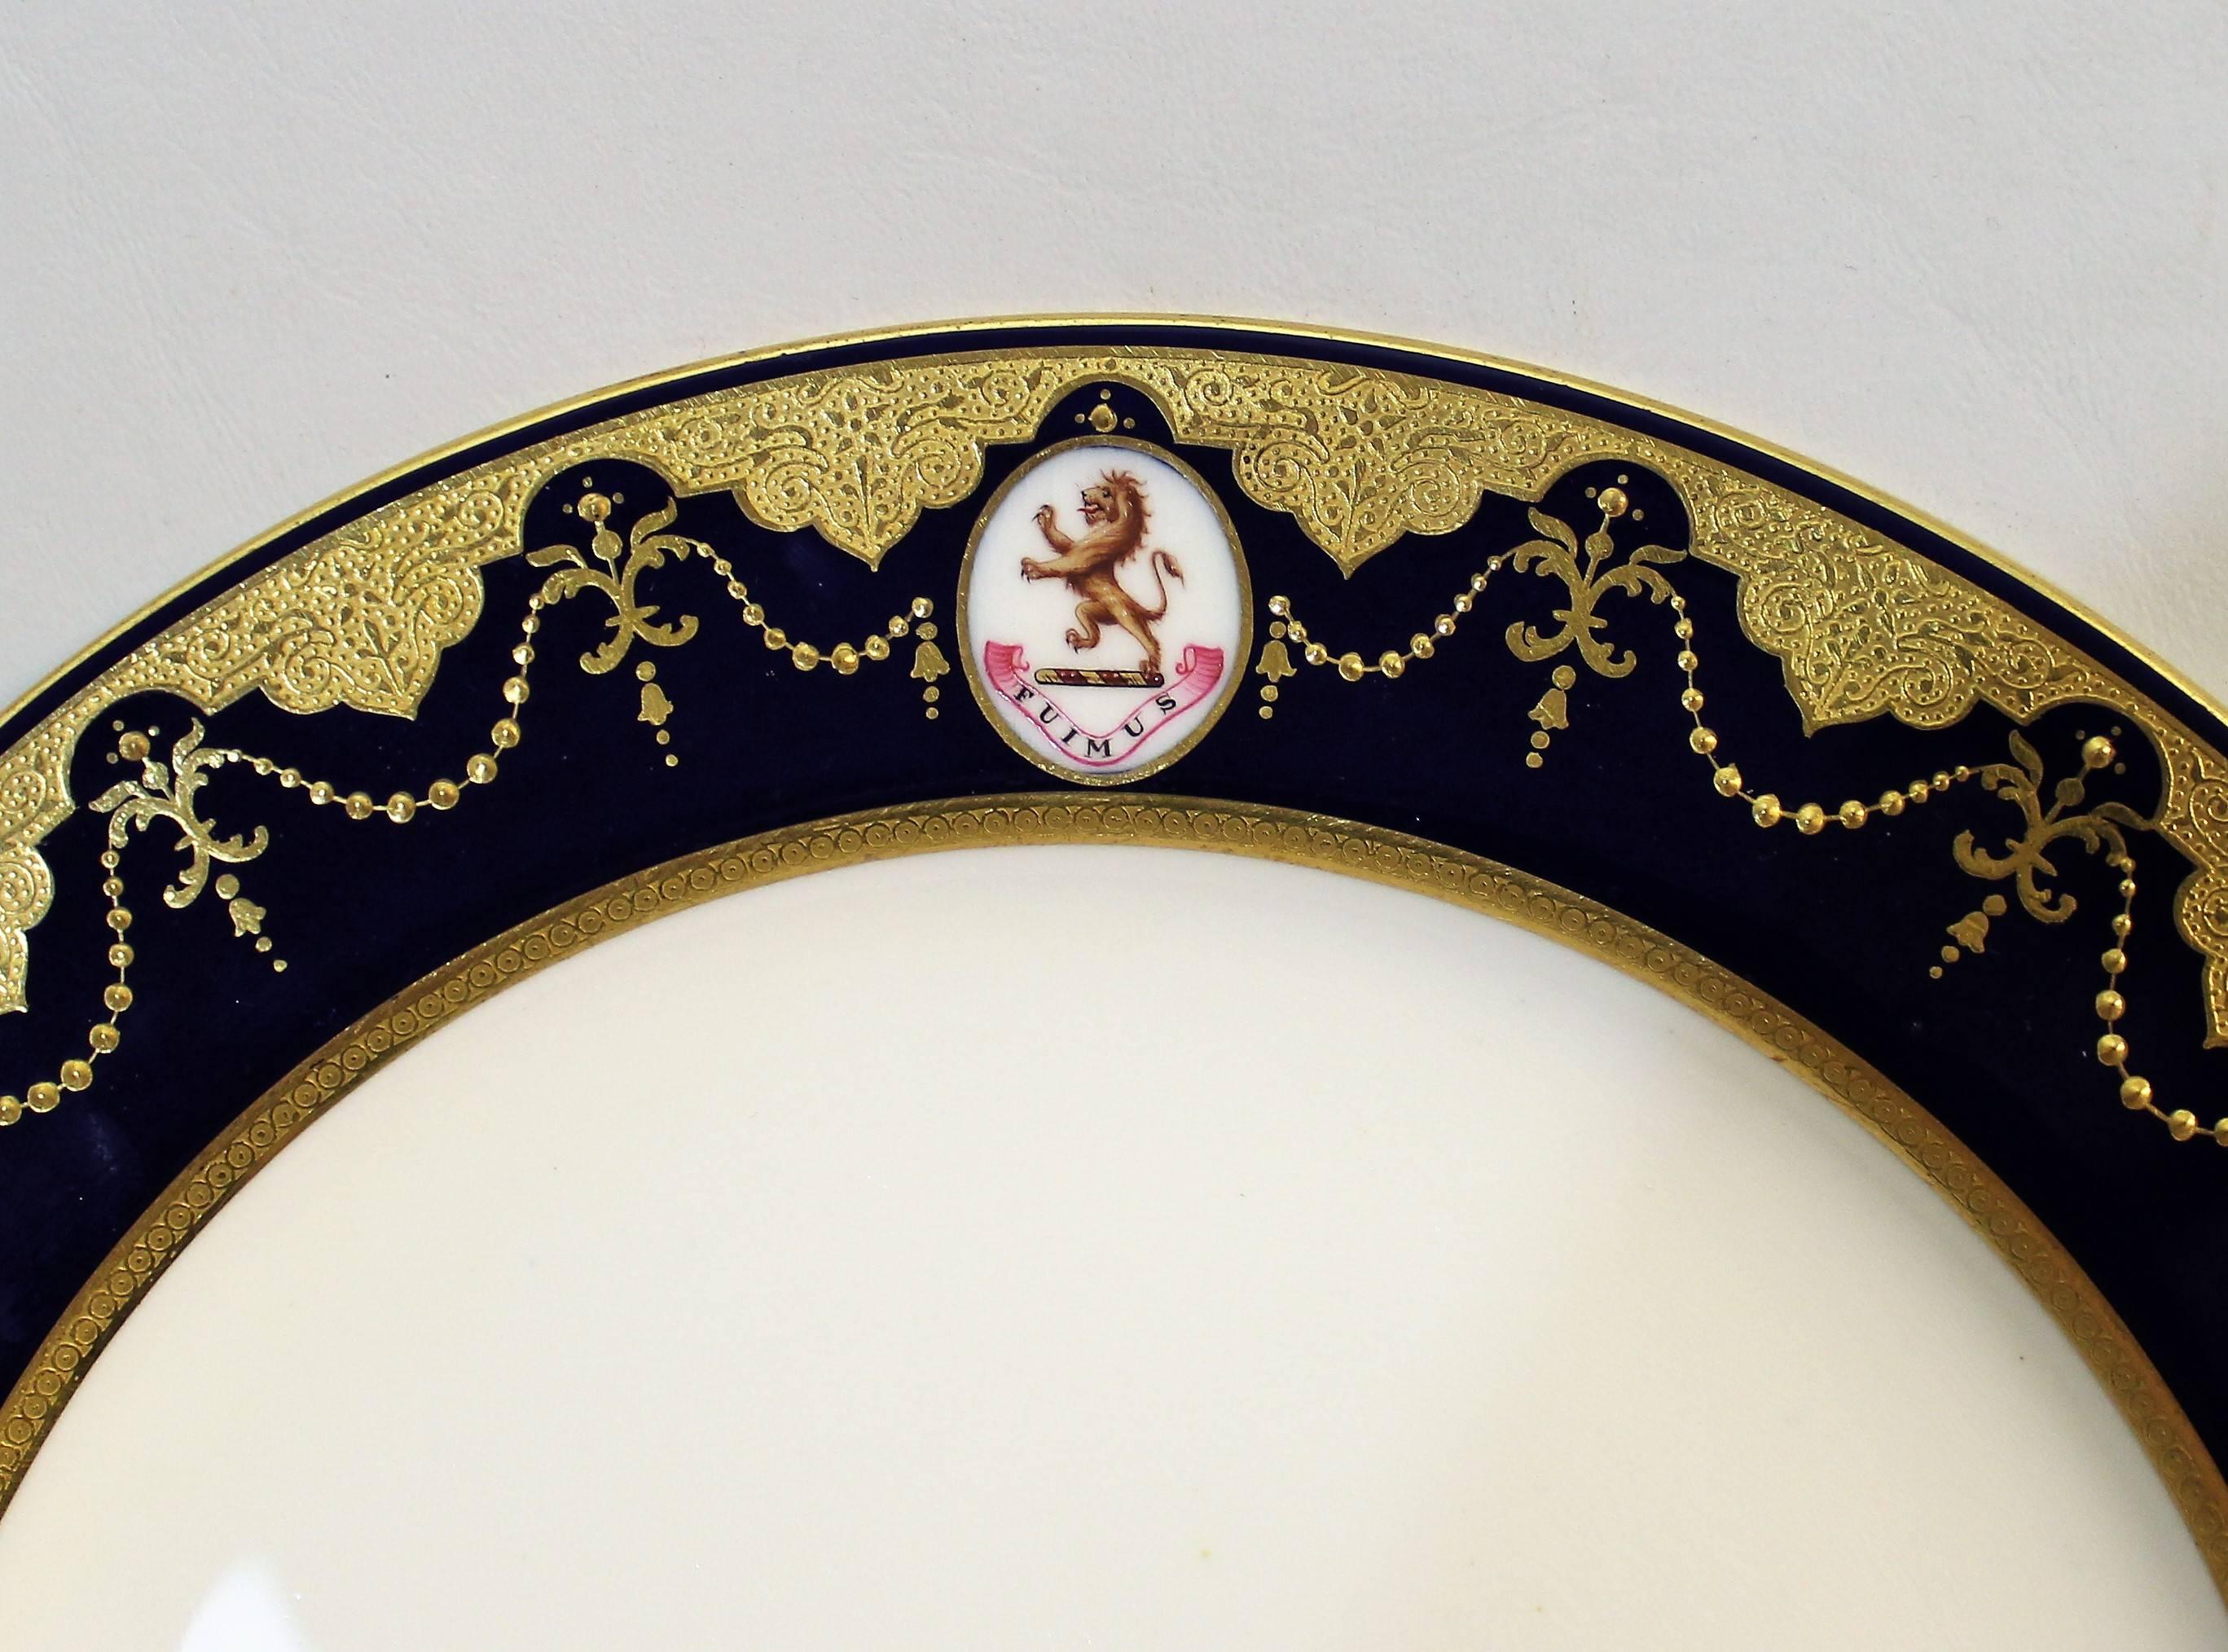 Set of eight Minton porcelain armorial dinner plates. These stunning plates feature raised paste gilt work accented with acid etched bands on a rich cobalt blue ground with armorial lion insignia bearing the motto 'Fuimus'. Measures: 10.25